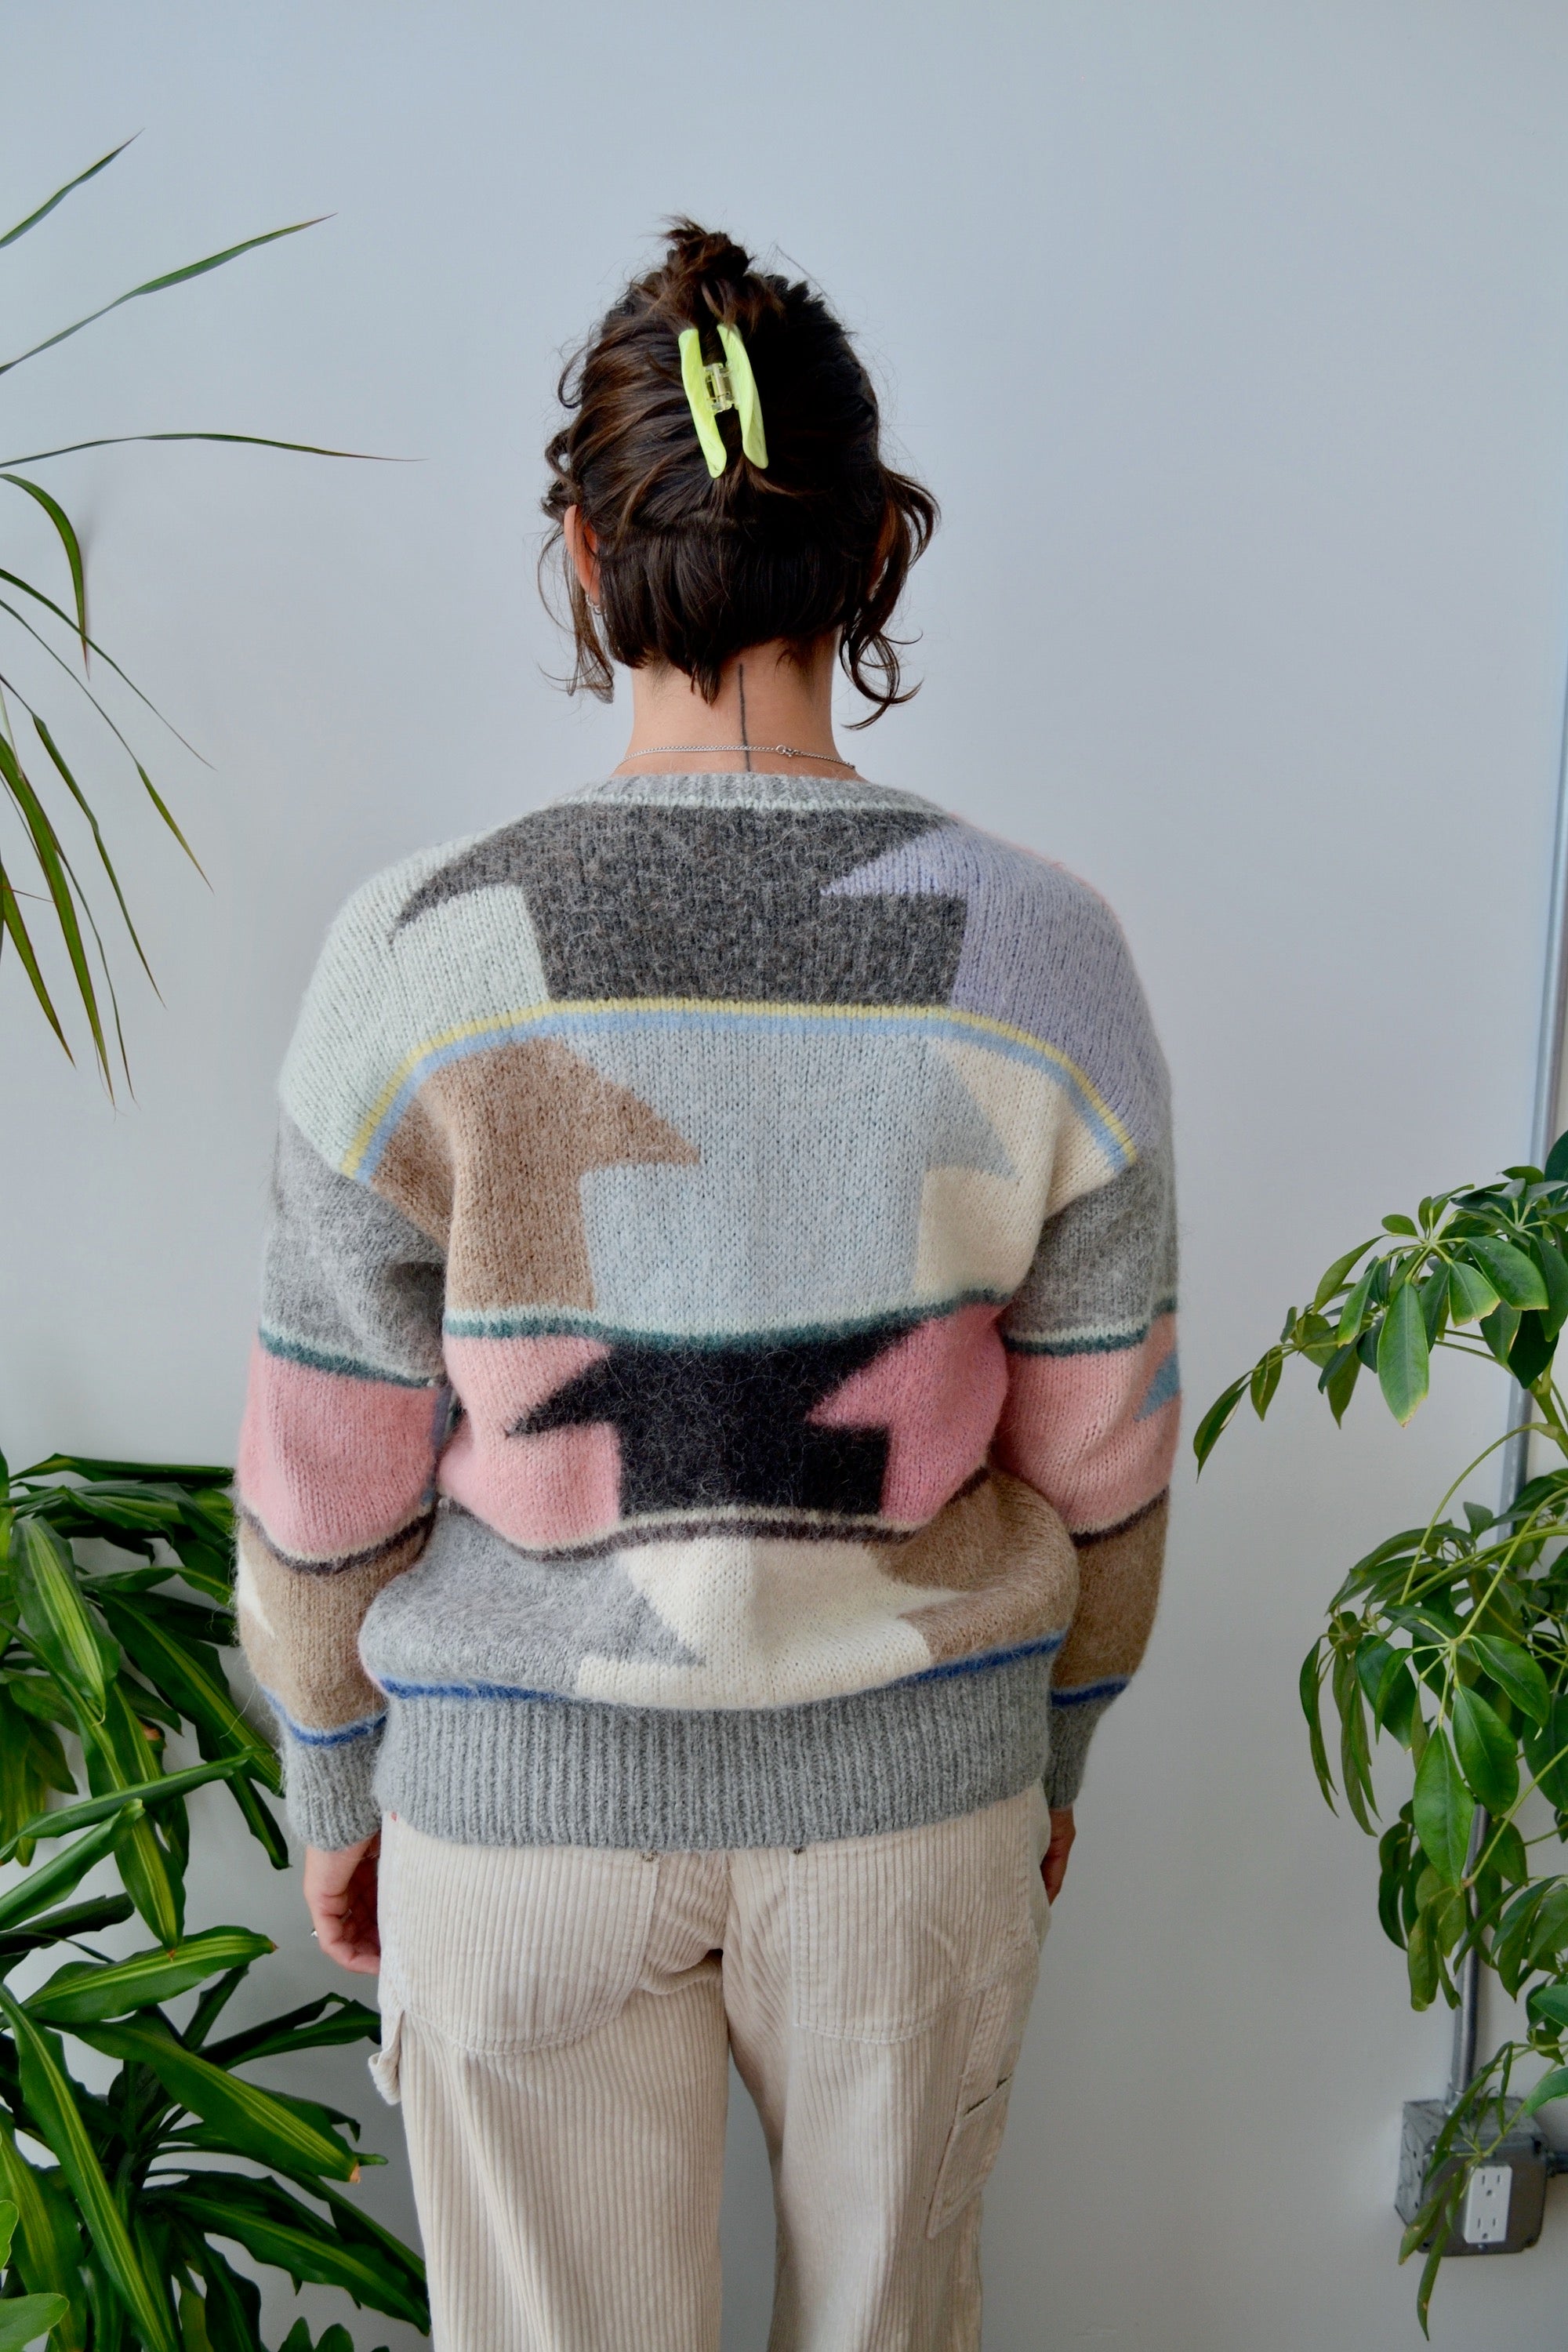 Soft Pastel Abstract Cardigan